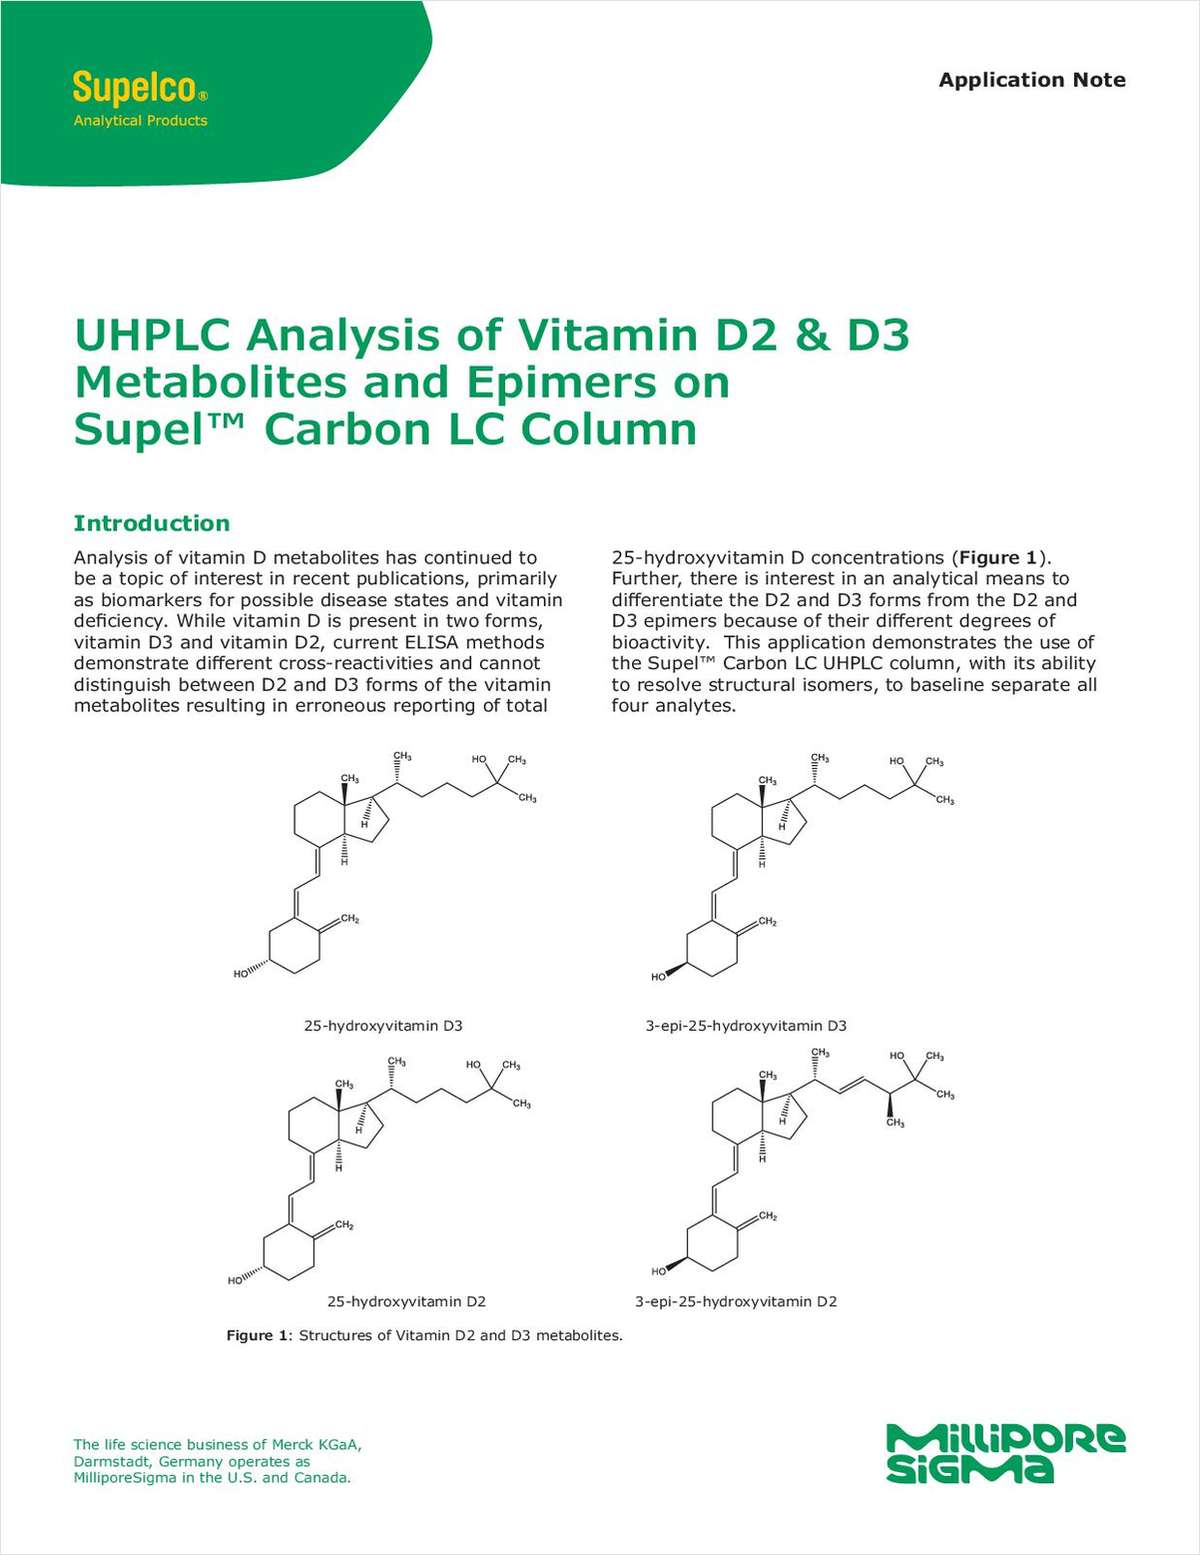 UHPLC Analysis of Vitamin D2 & D3 Metabolites and Epimers on Supel Carbon LC Column